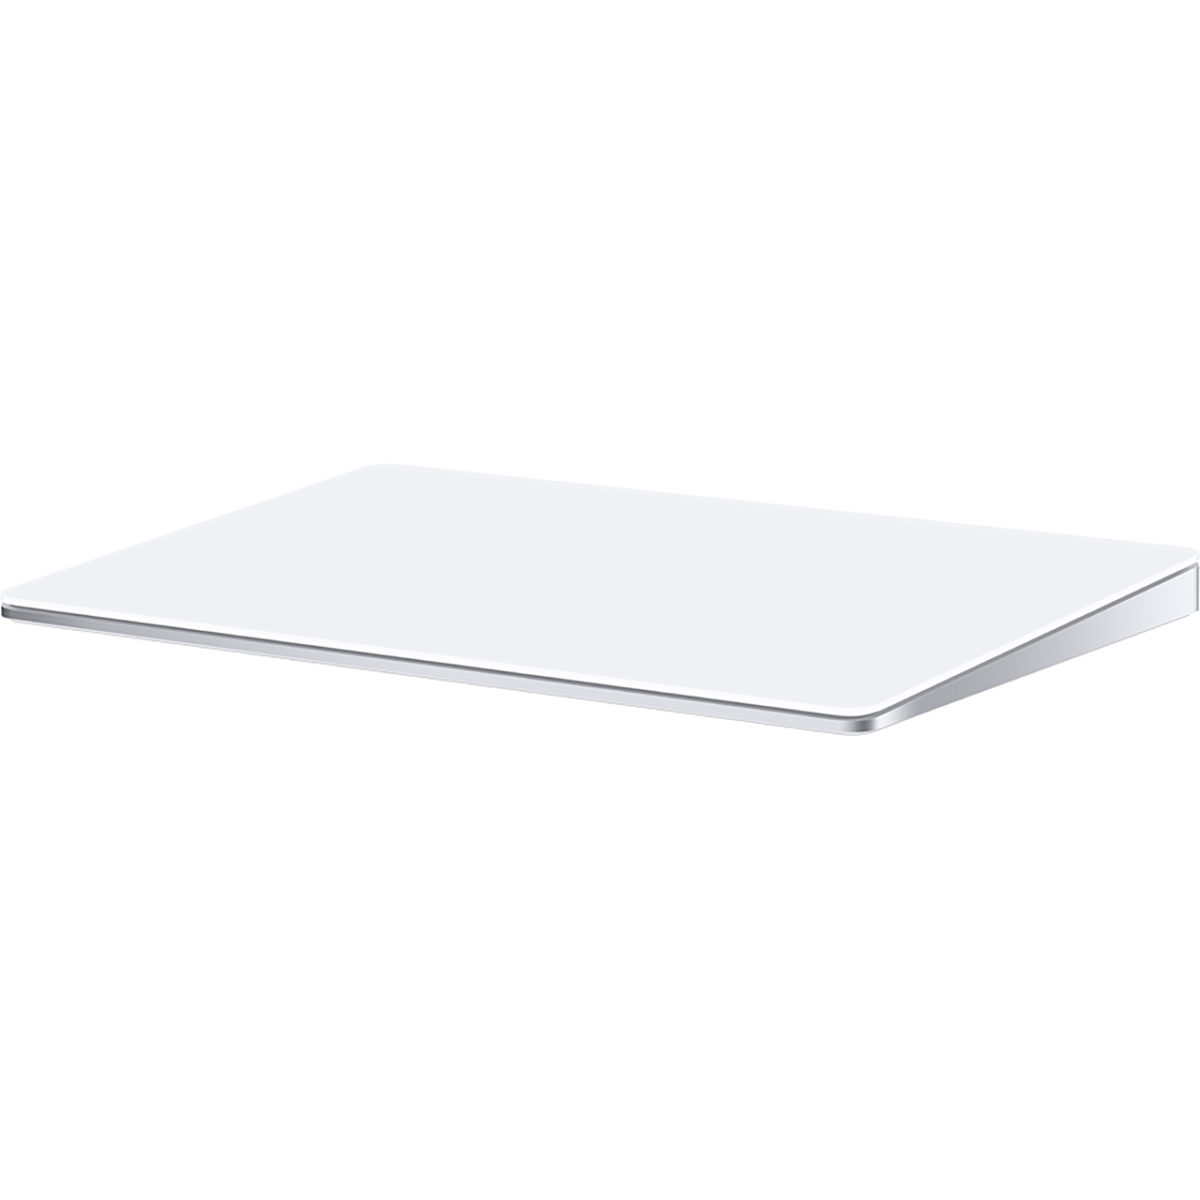 difference between magic trackpad 1 and 2